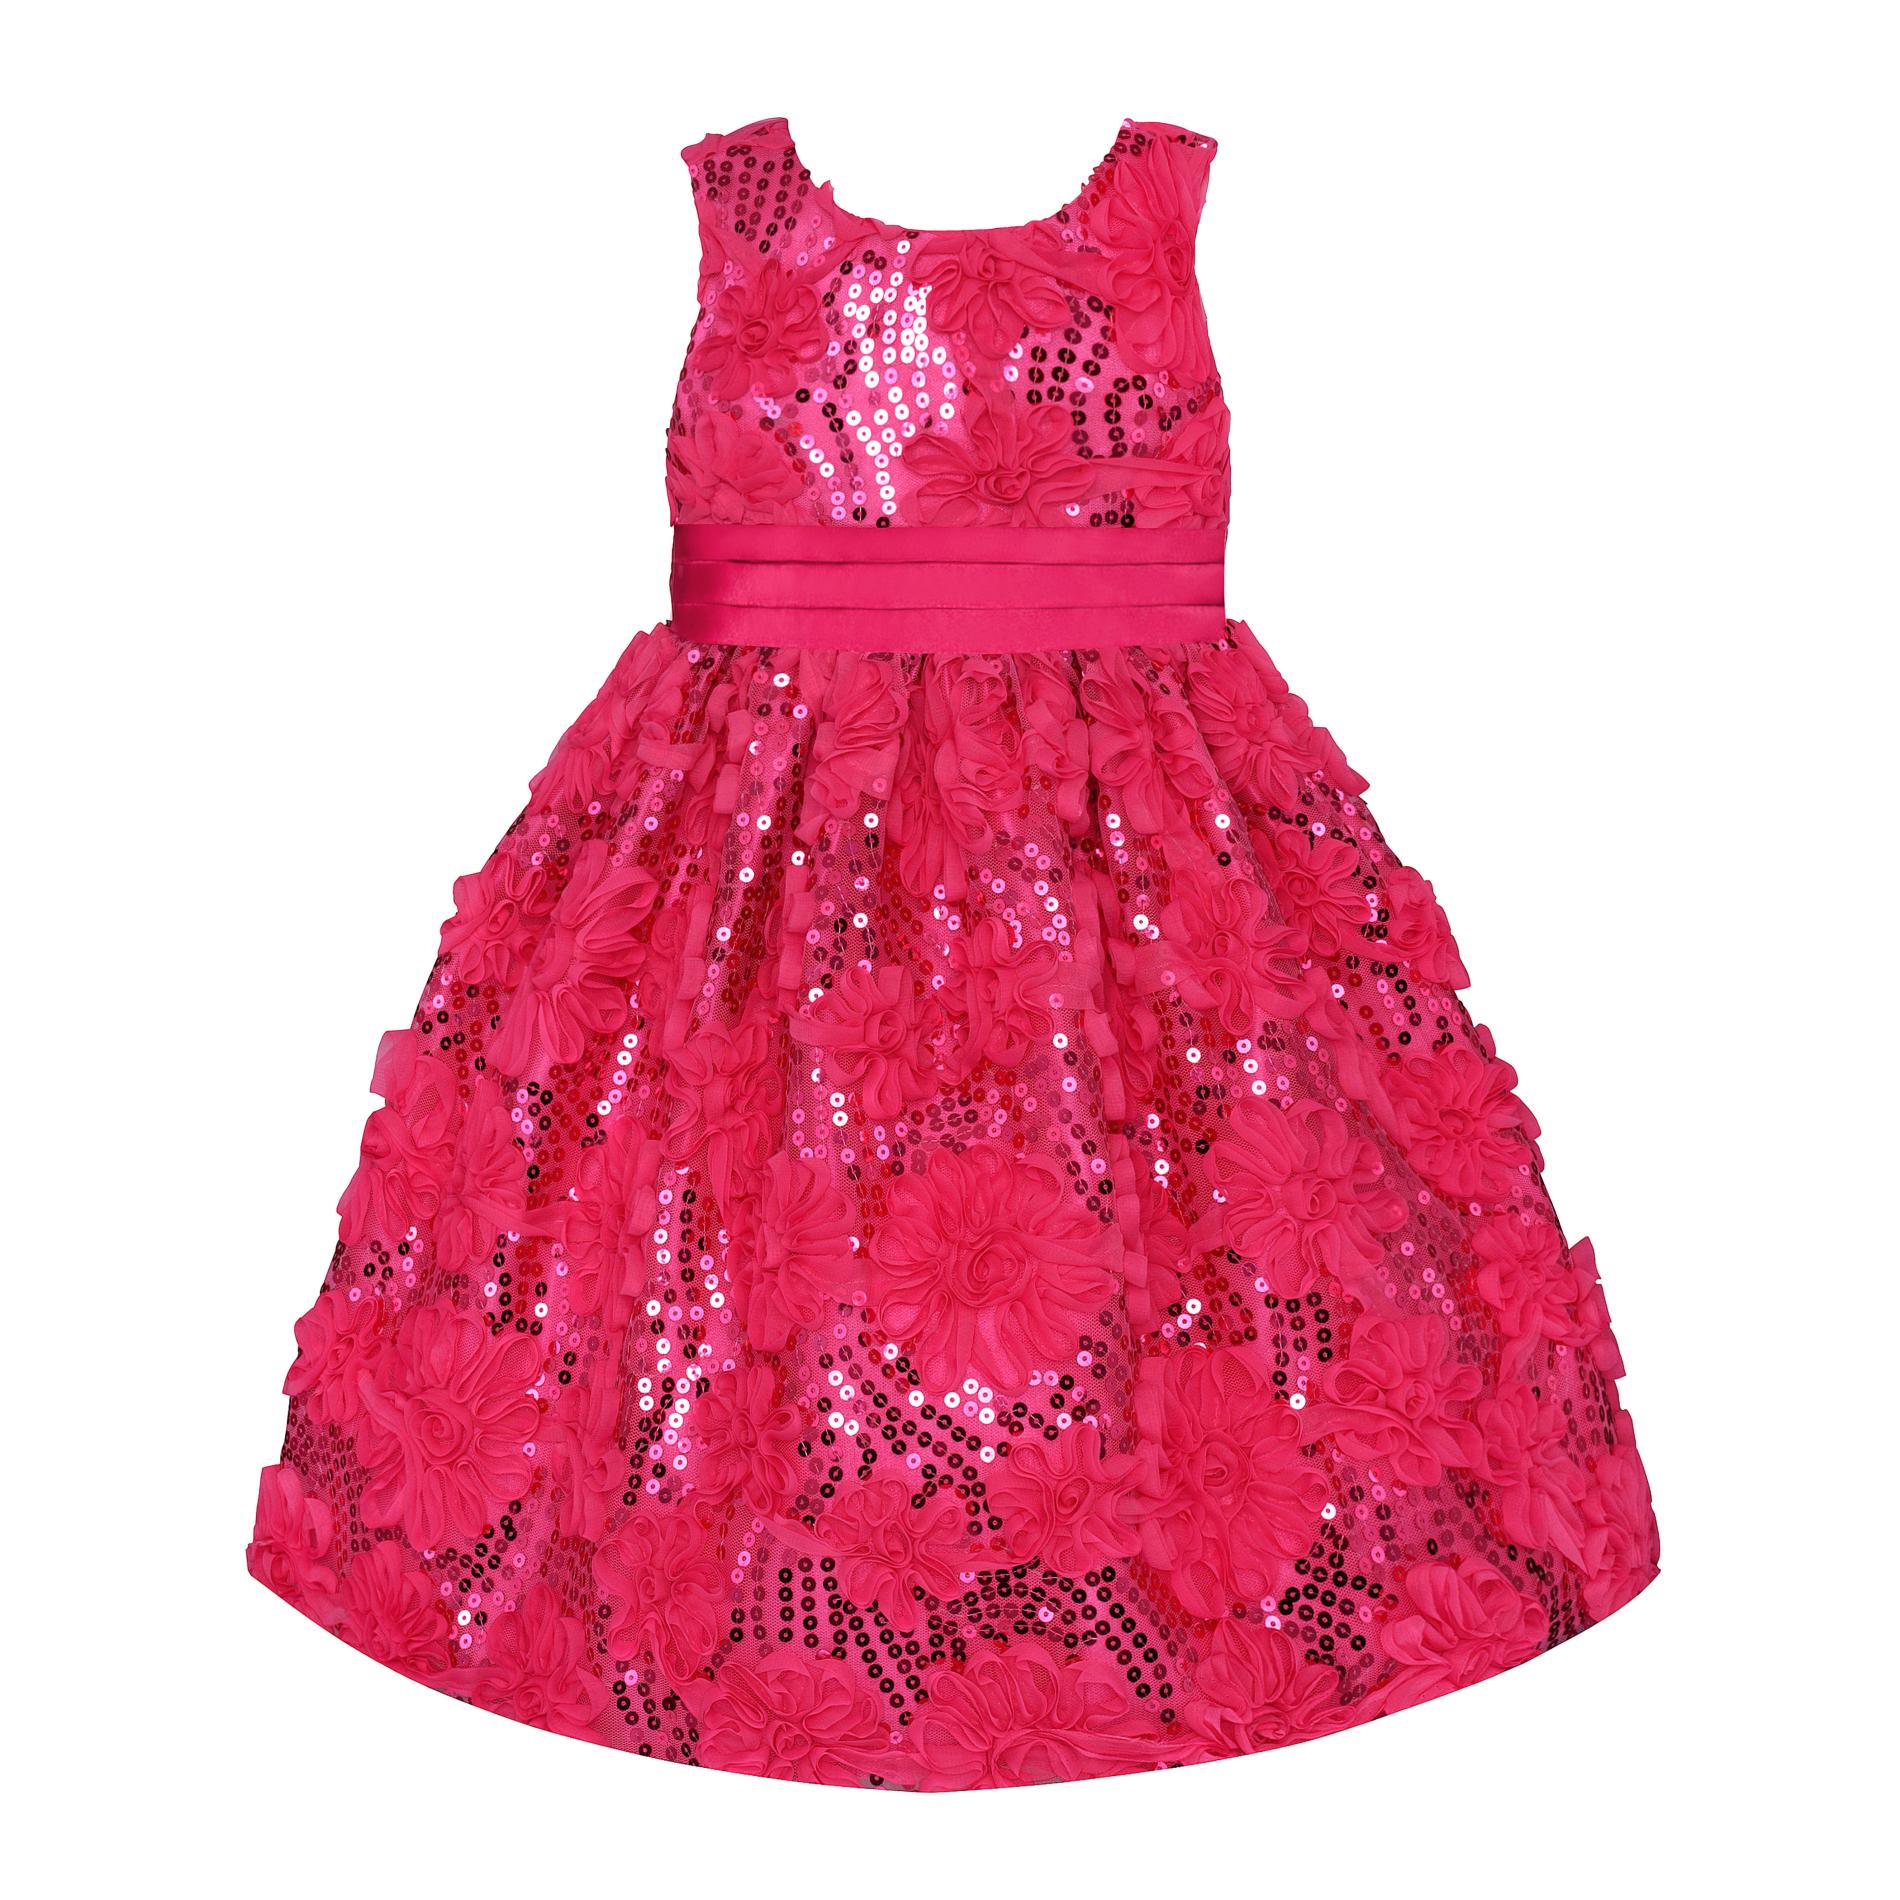 American Princess Infant & Toddler Girl's Party Dress